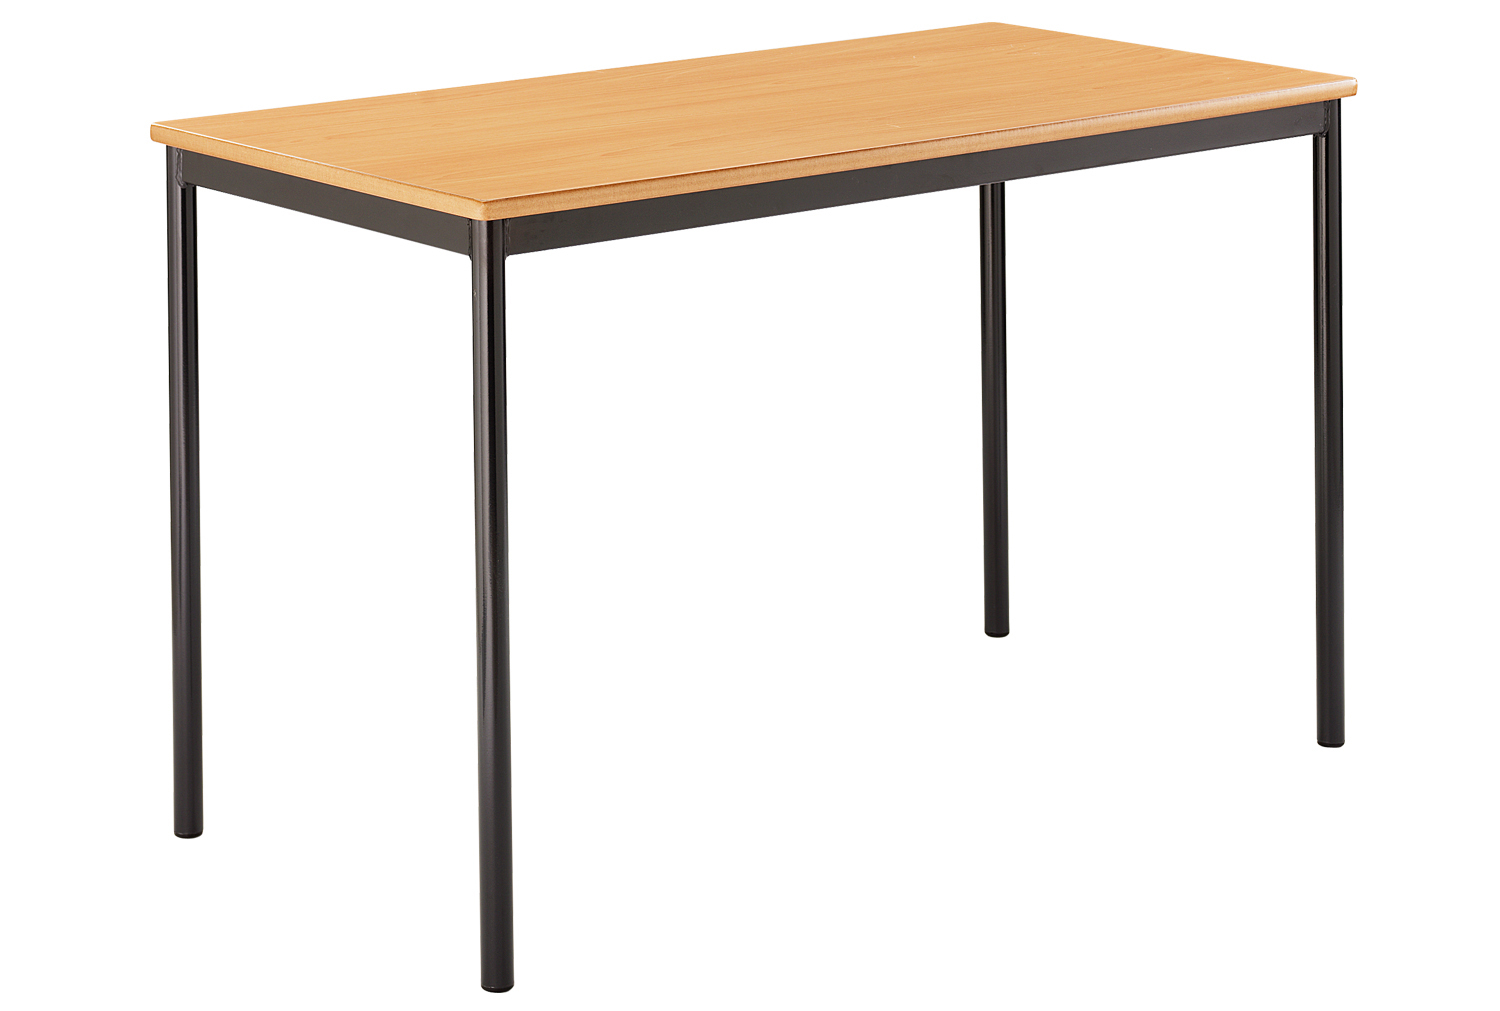 Qty 4 - Rectangular Fully Welded Classroom Tables 8-11 Years, 110wx55dx64h (cm), Charcoal Frame, Grey Top, MDF Beech Edge